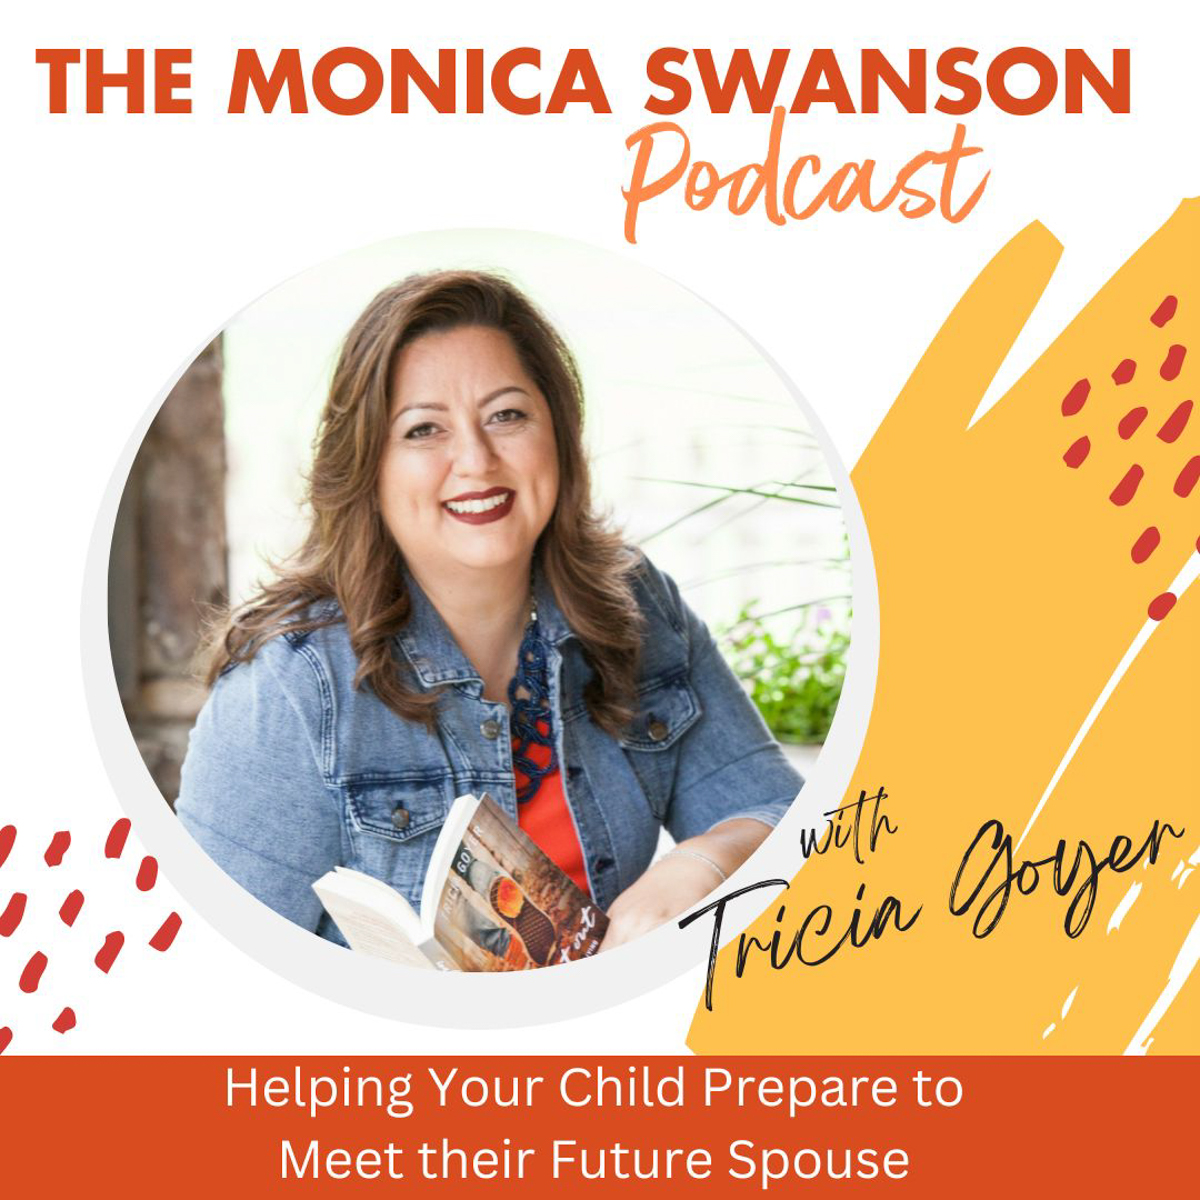 Helping Your Child Prepare to Meet their Future Spouse, with Tricia Goyer